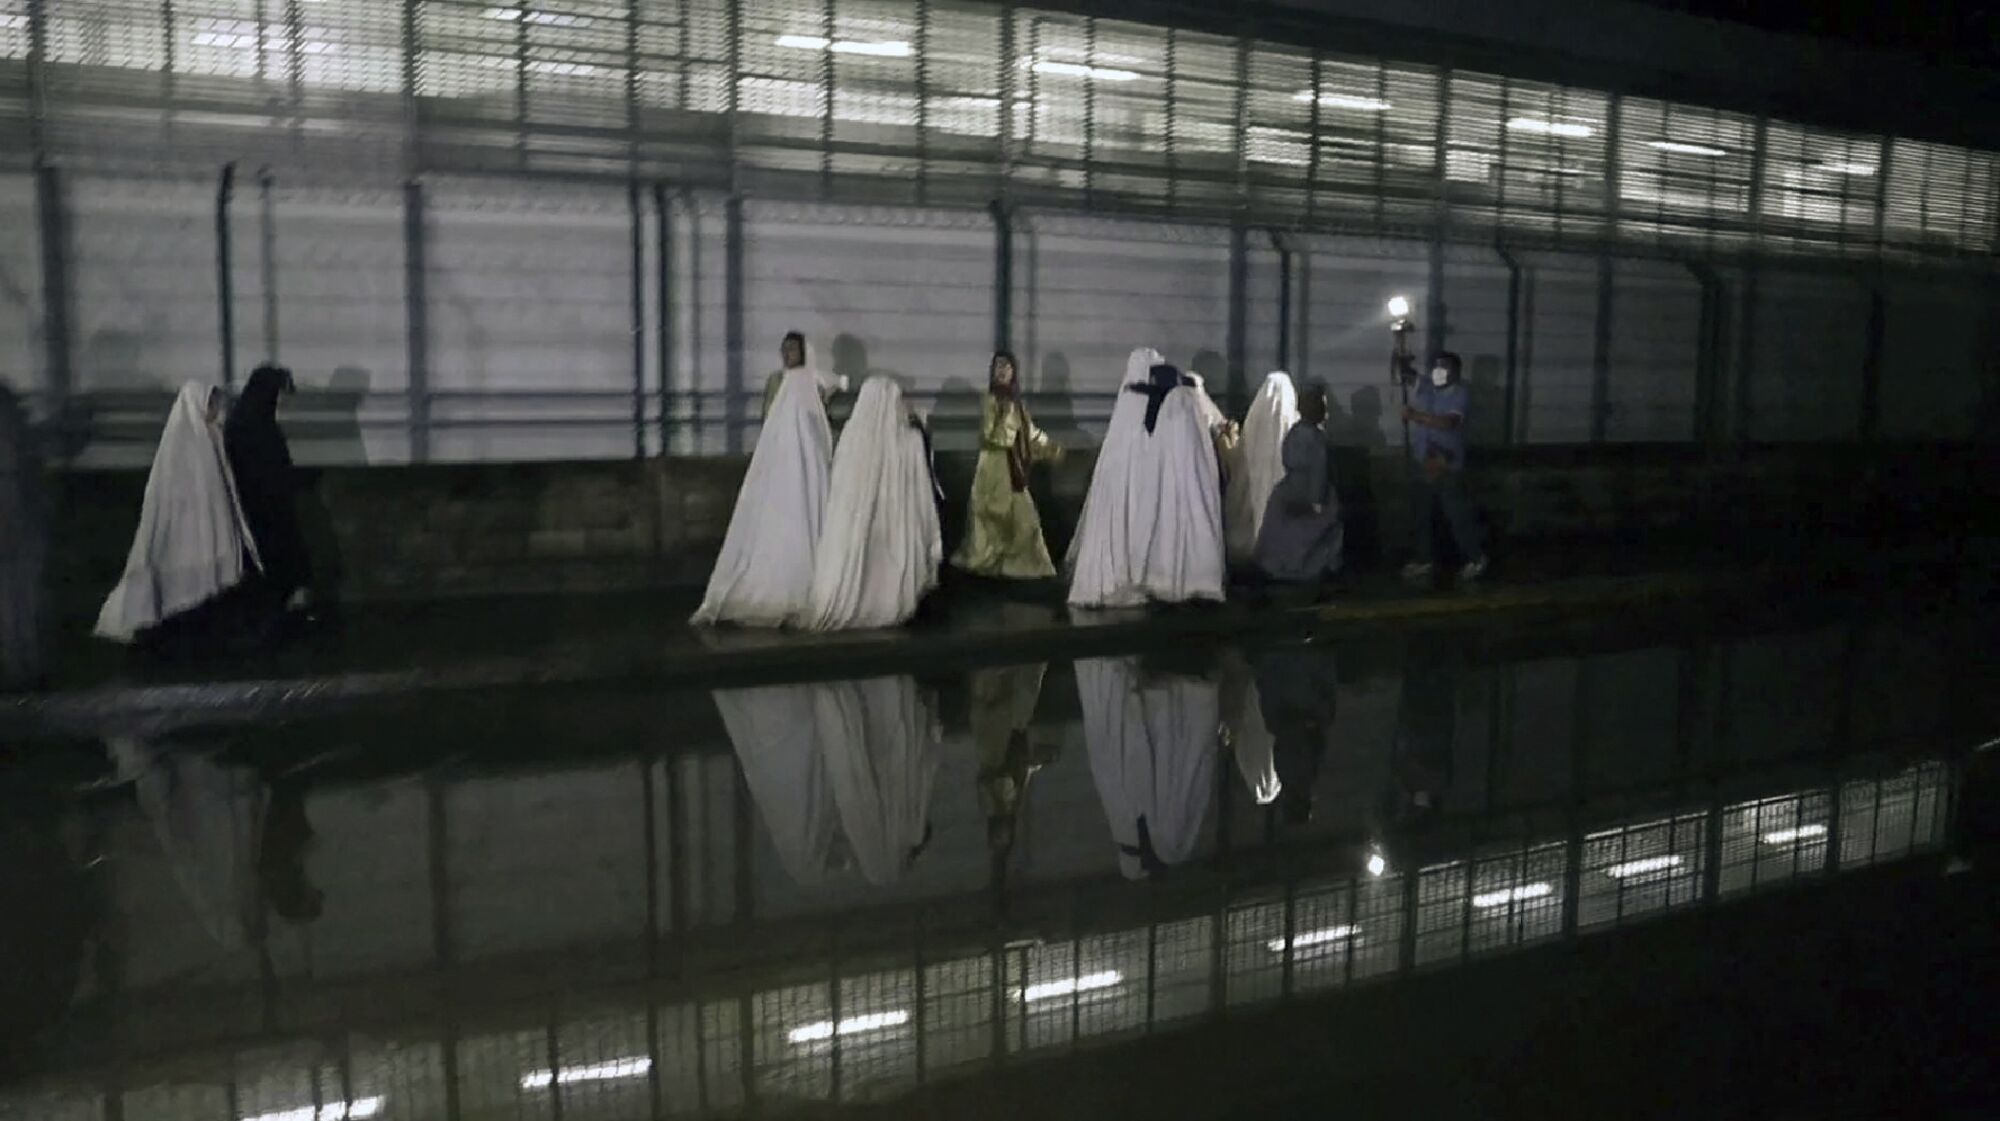 A group people, some cloaked from head to toe in white robes, walk on a sidewalk near a wall with lighting